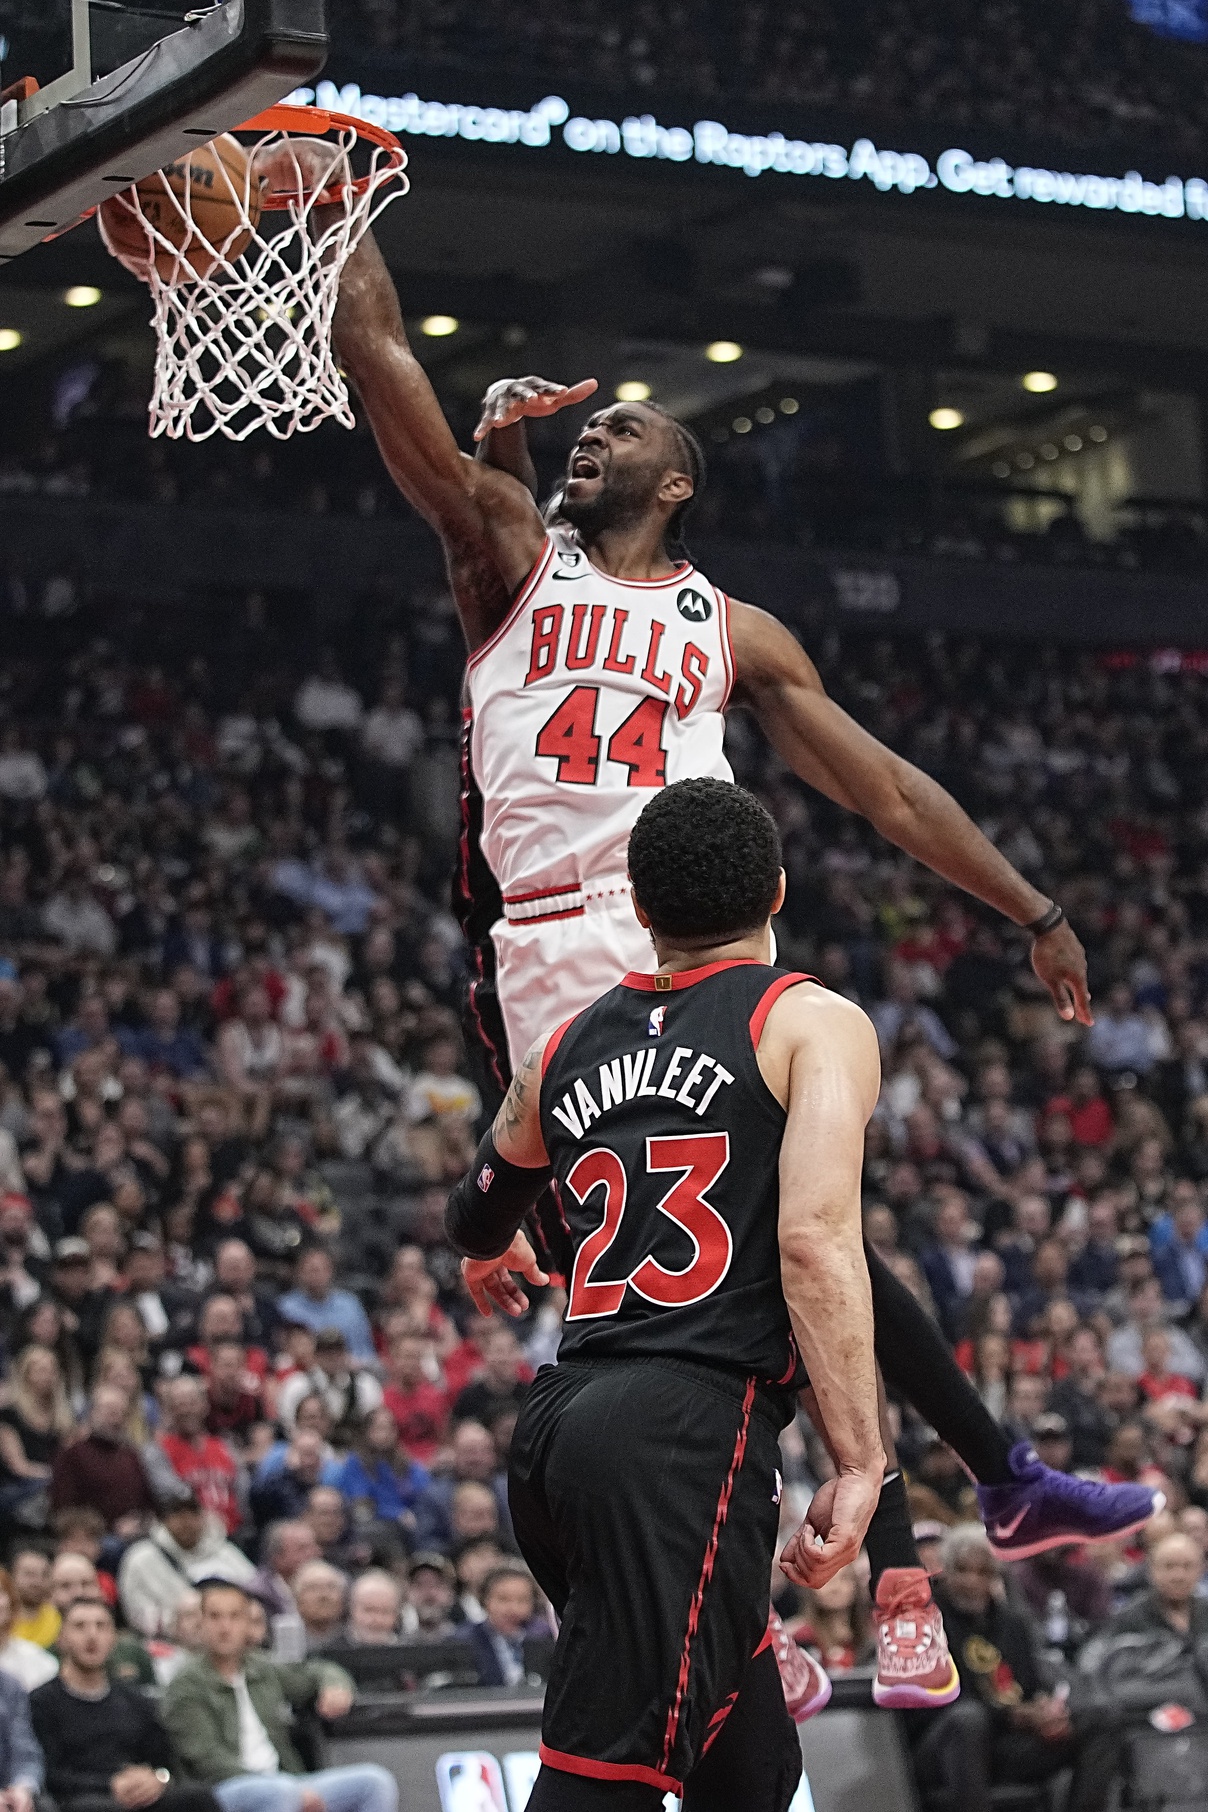 Apr 12, 2023; Toronto, Ontario, CAN; Chicago Bulls forward Patrick Williams (44) dunks as Toronto Raptors guard Fred VanVleet (23) looks on during the first half of the NBA Play-In game at Scotiabank Arena. Mandatory Credit: John E. Sokolowski-USA TODAY Sports. Williams will battle out Torey Craig in the Chicago Bulls rotation.